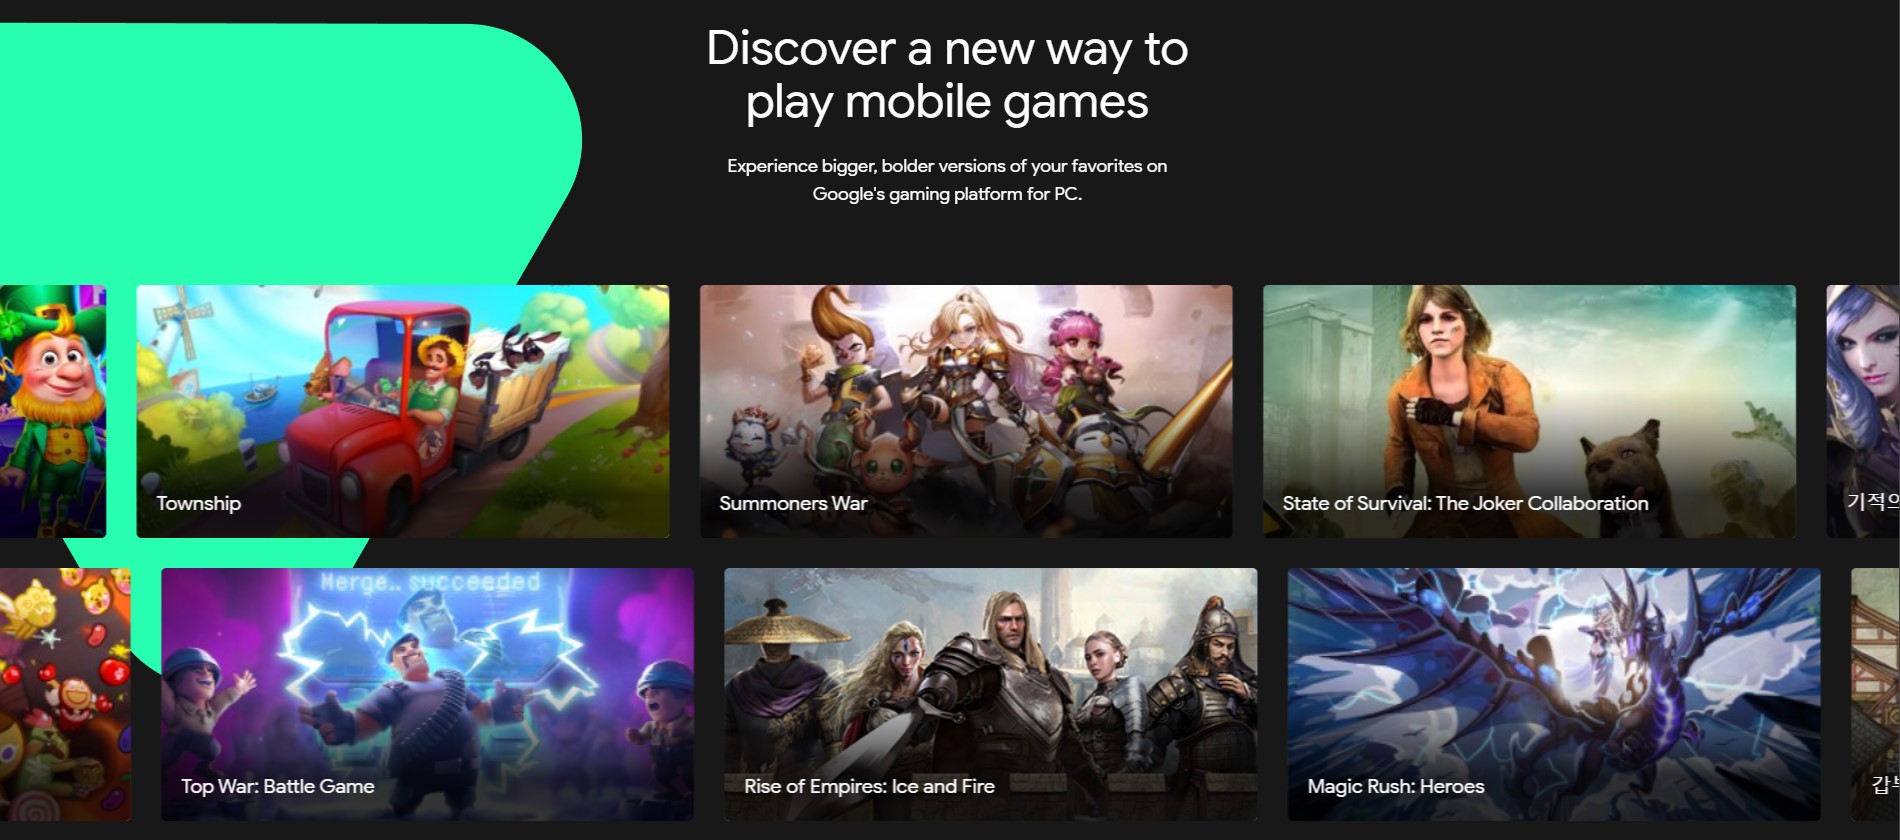 Google Play Games beta announced at TGA 2022, set to offer gamers